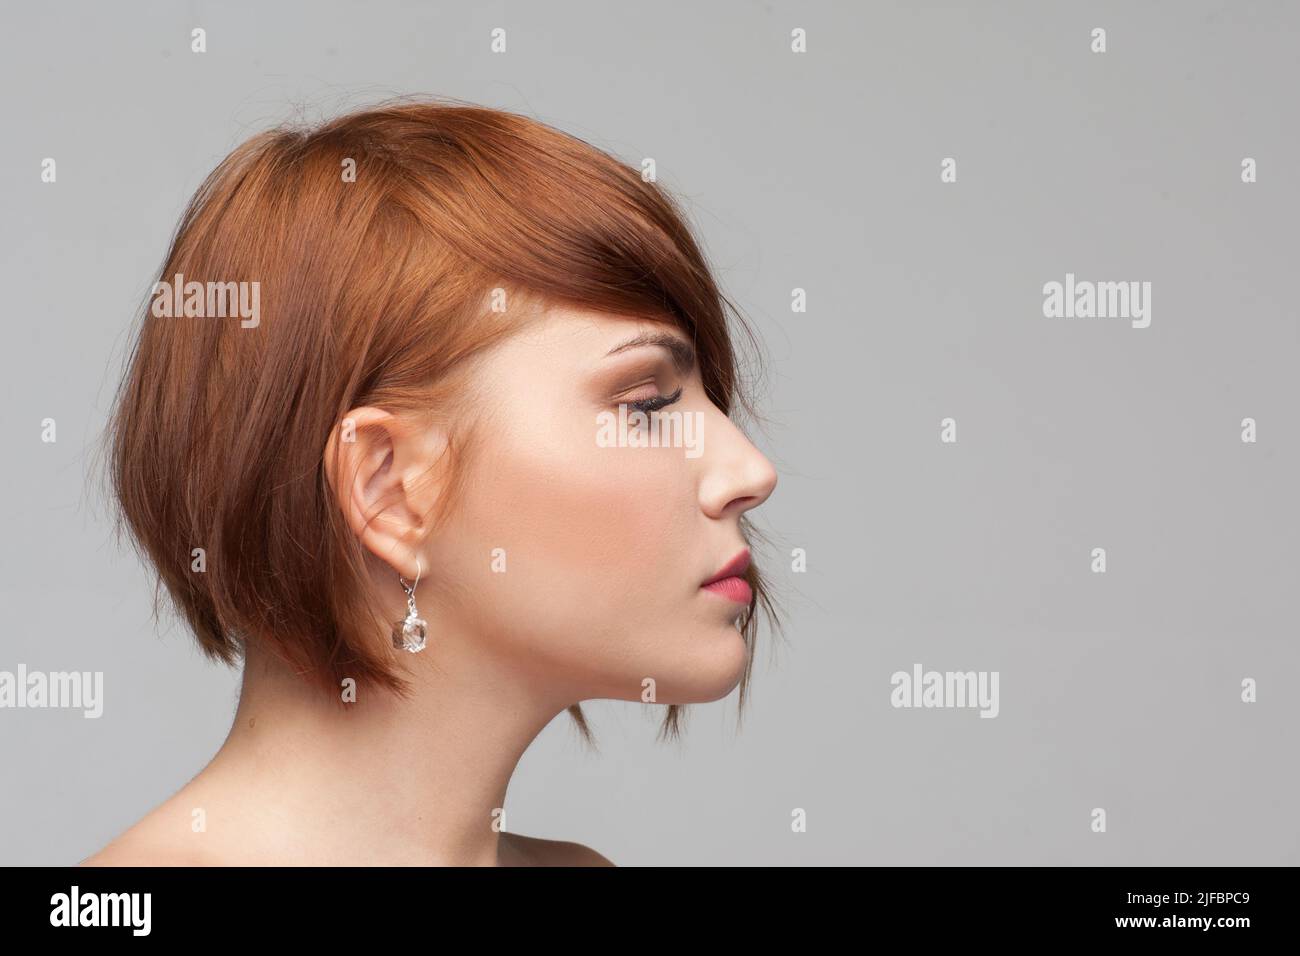 Beauty portrait. Female hairstyle advertising Stock Photo